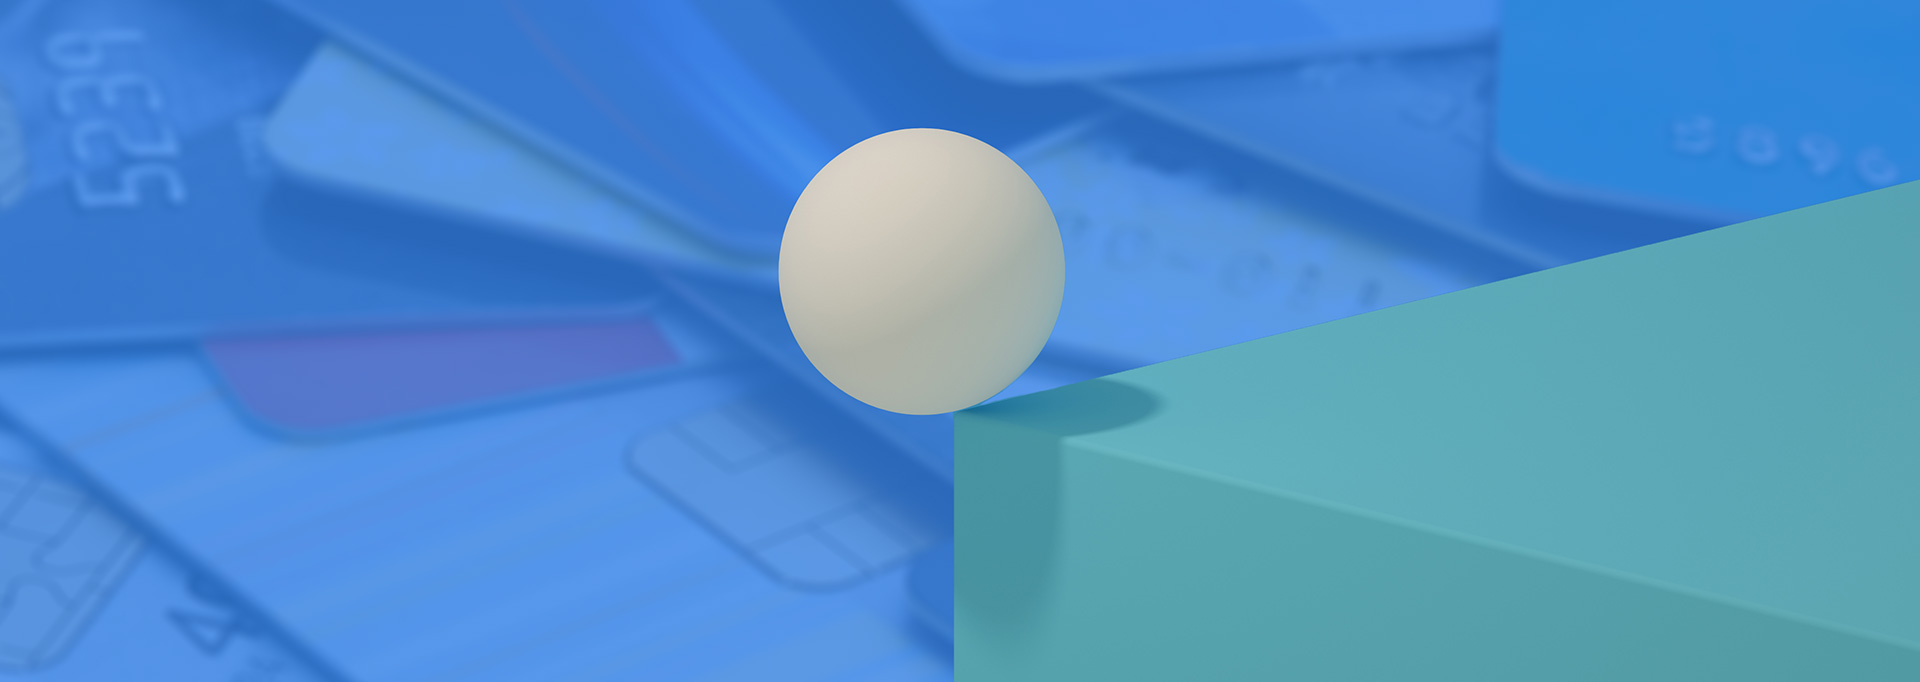 ball on edge of block over credit card background